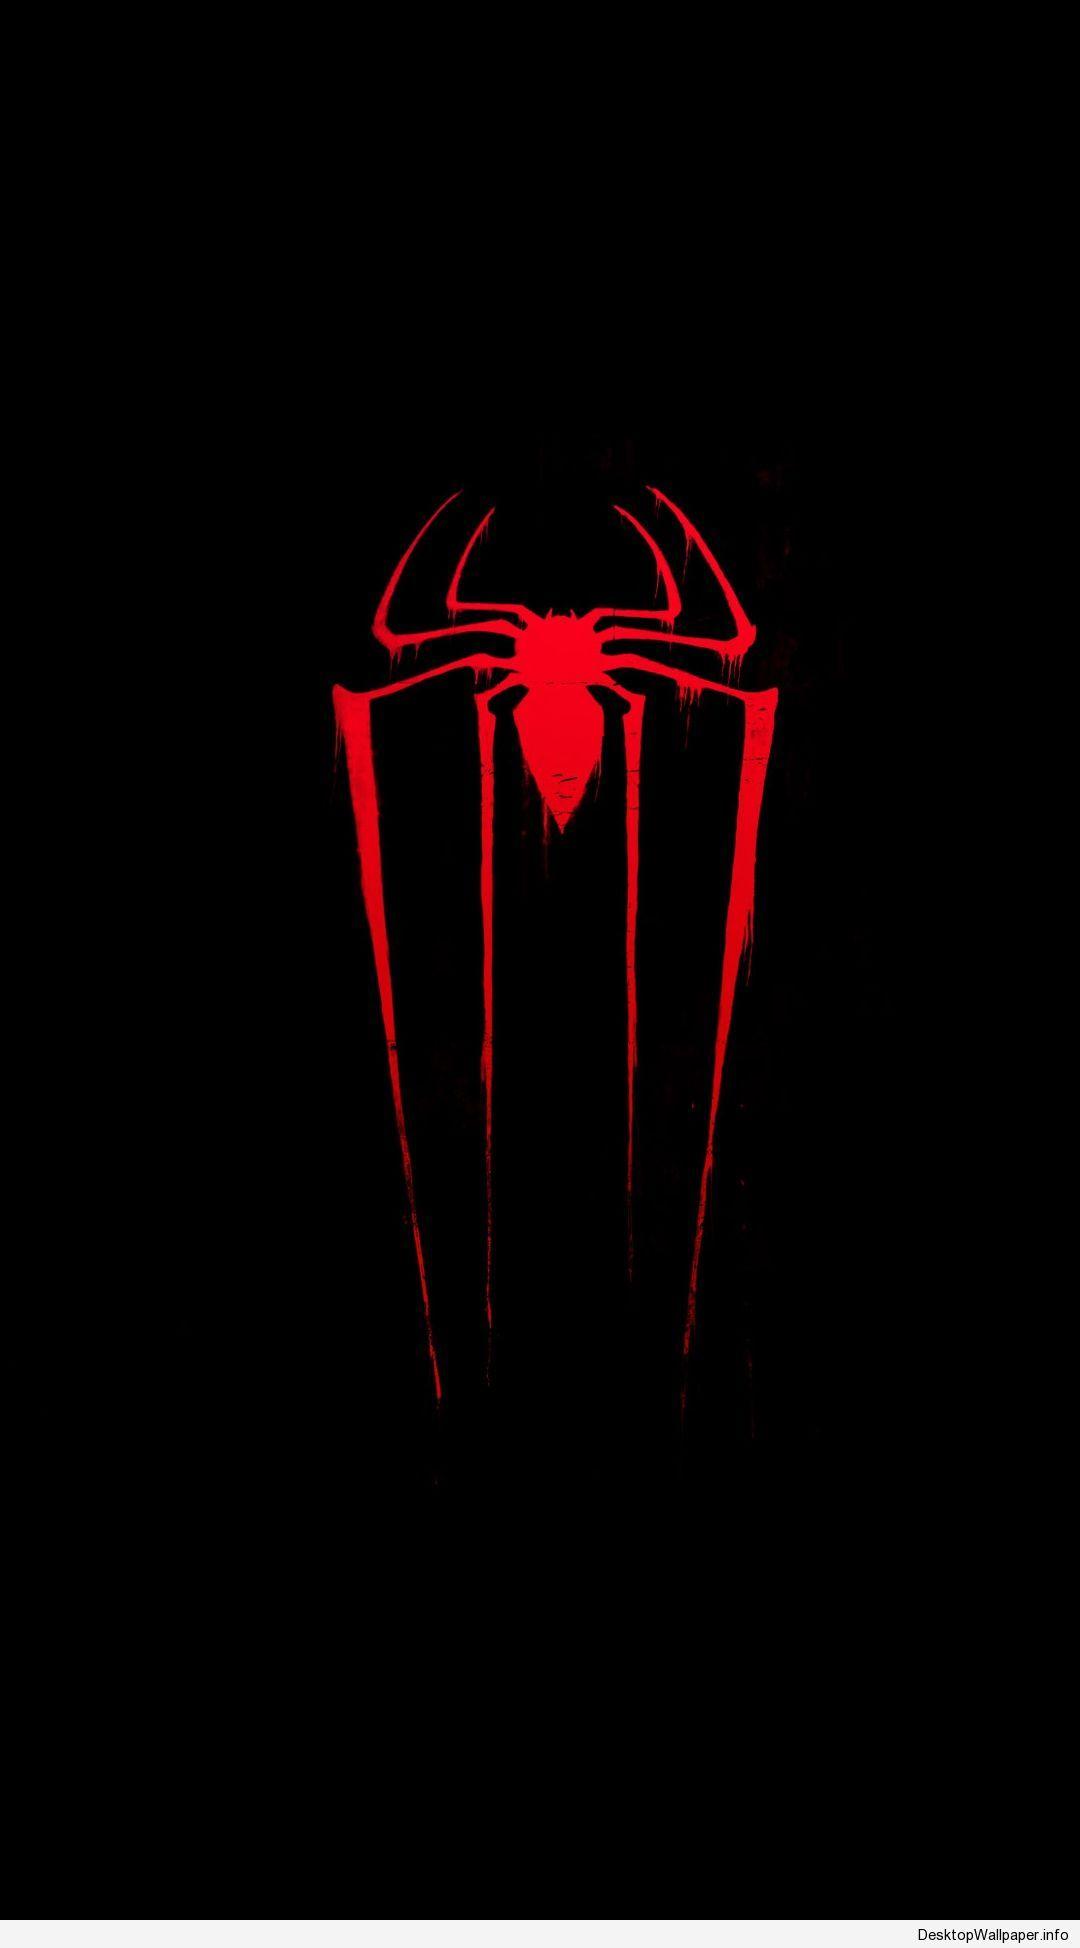 Spiderman Wallpapers For Android - Wallpaper Cave